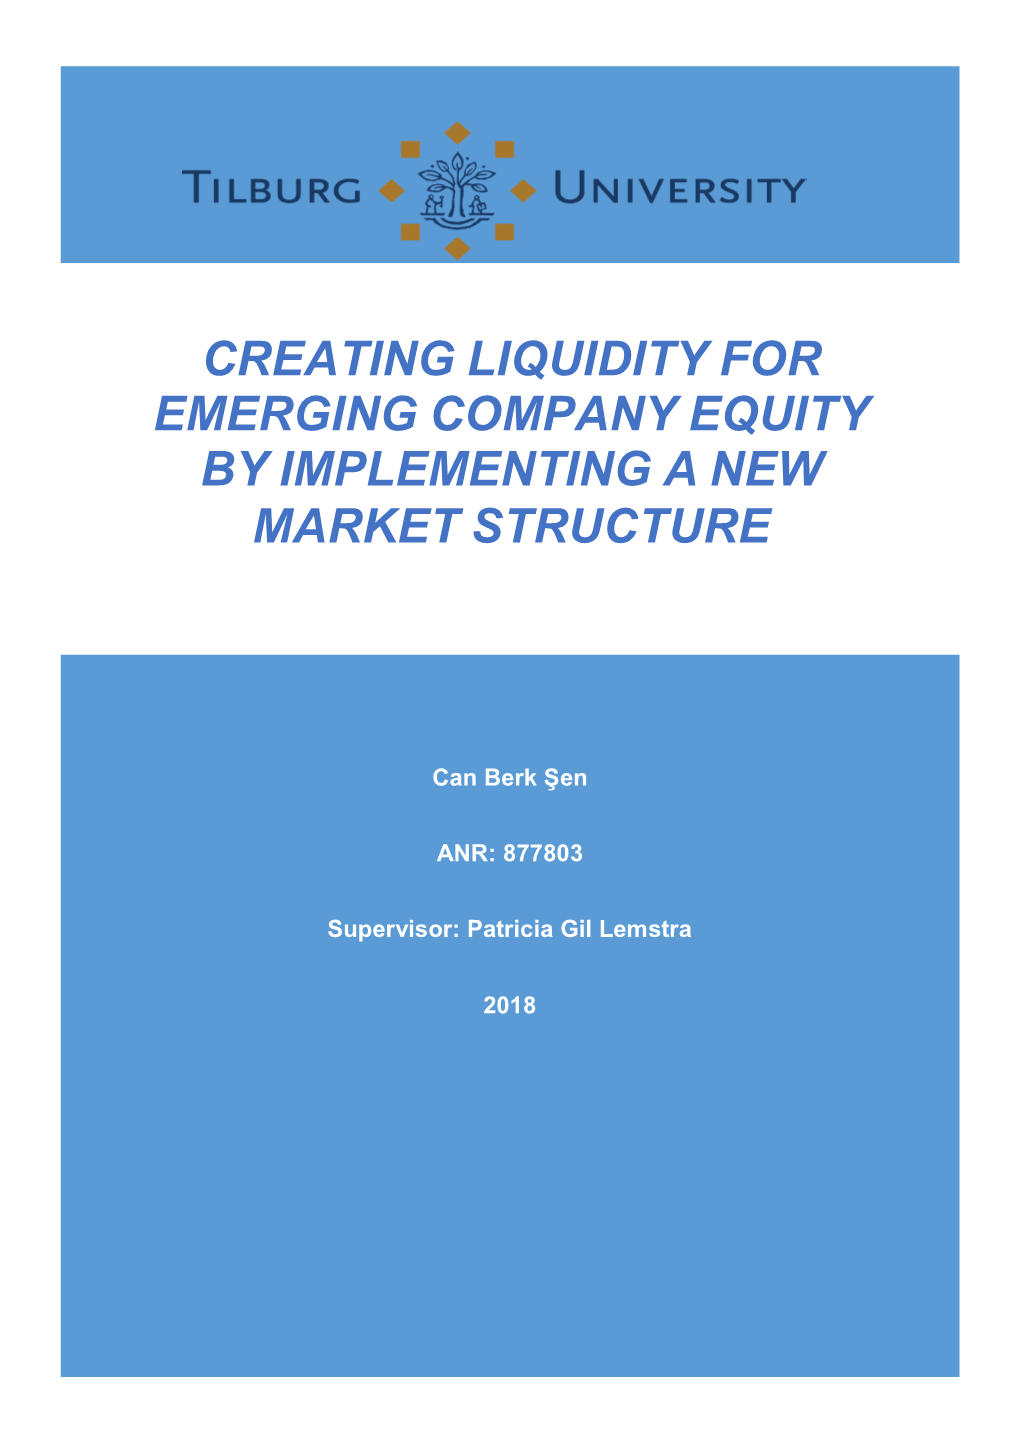 Creating Liquidity for Equity by Implementing a New